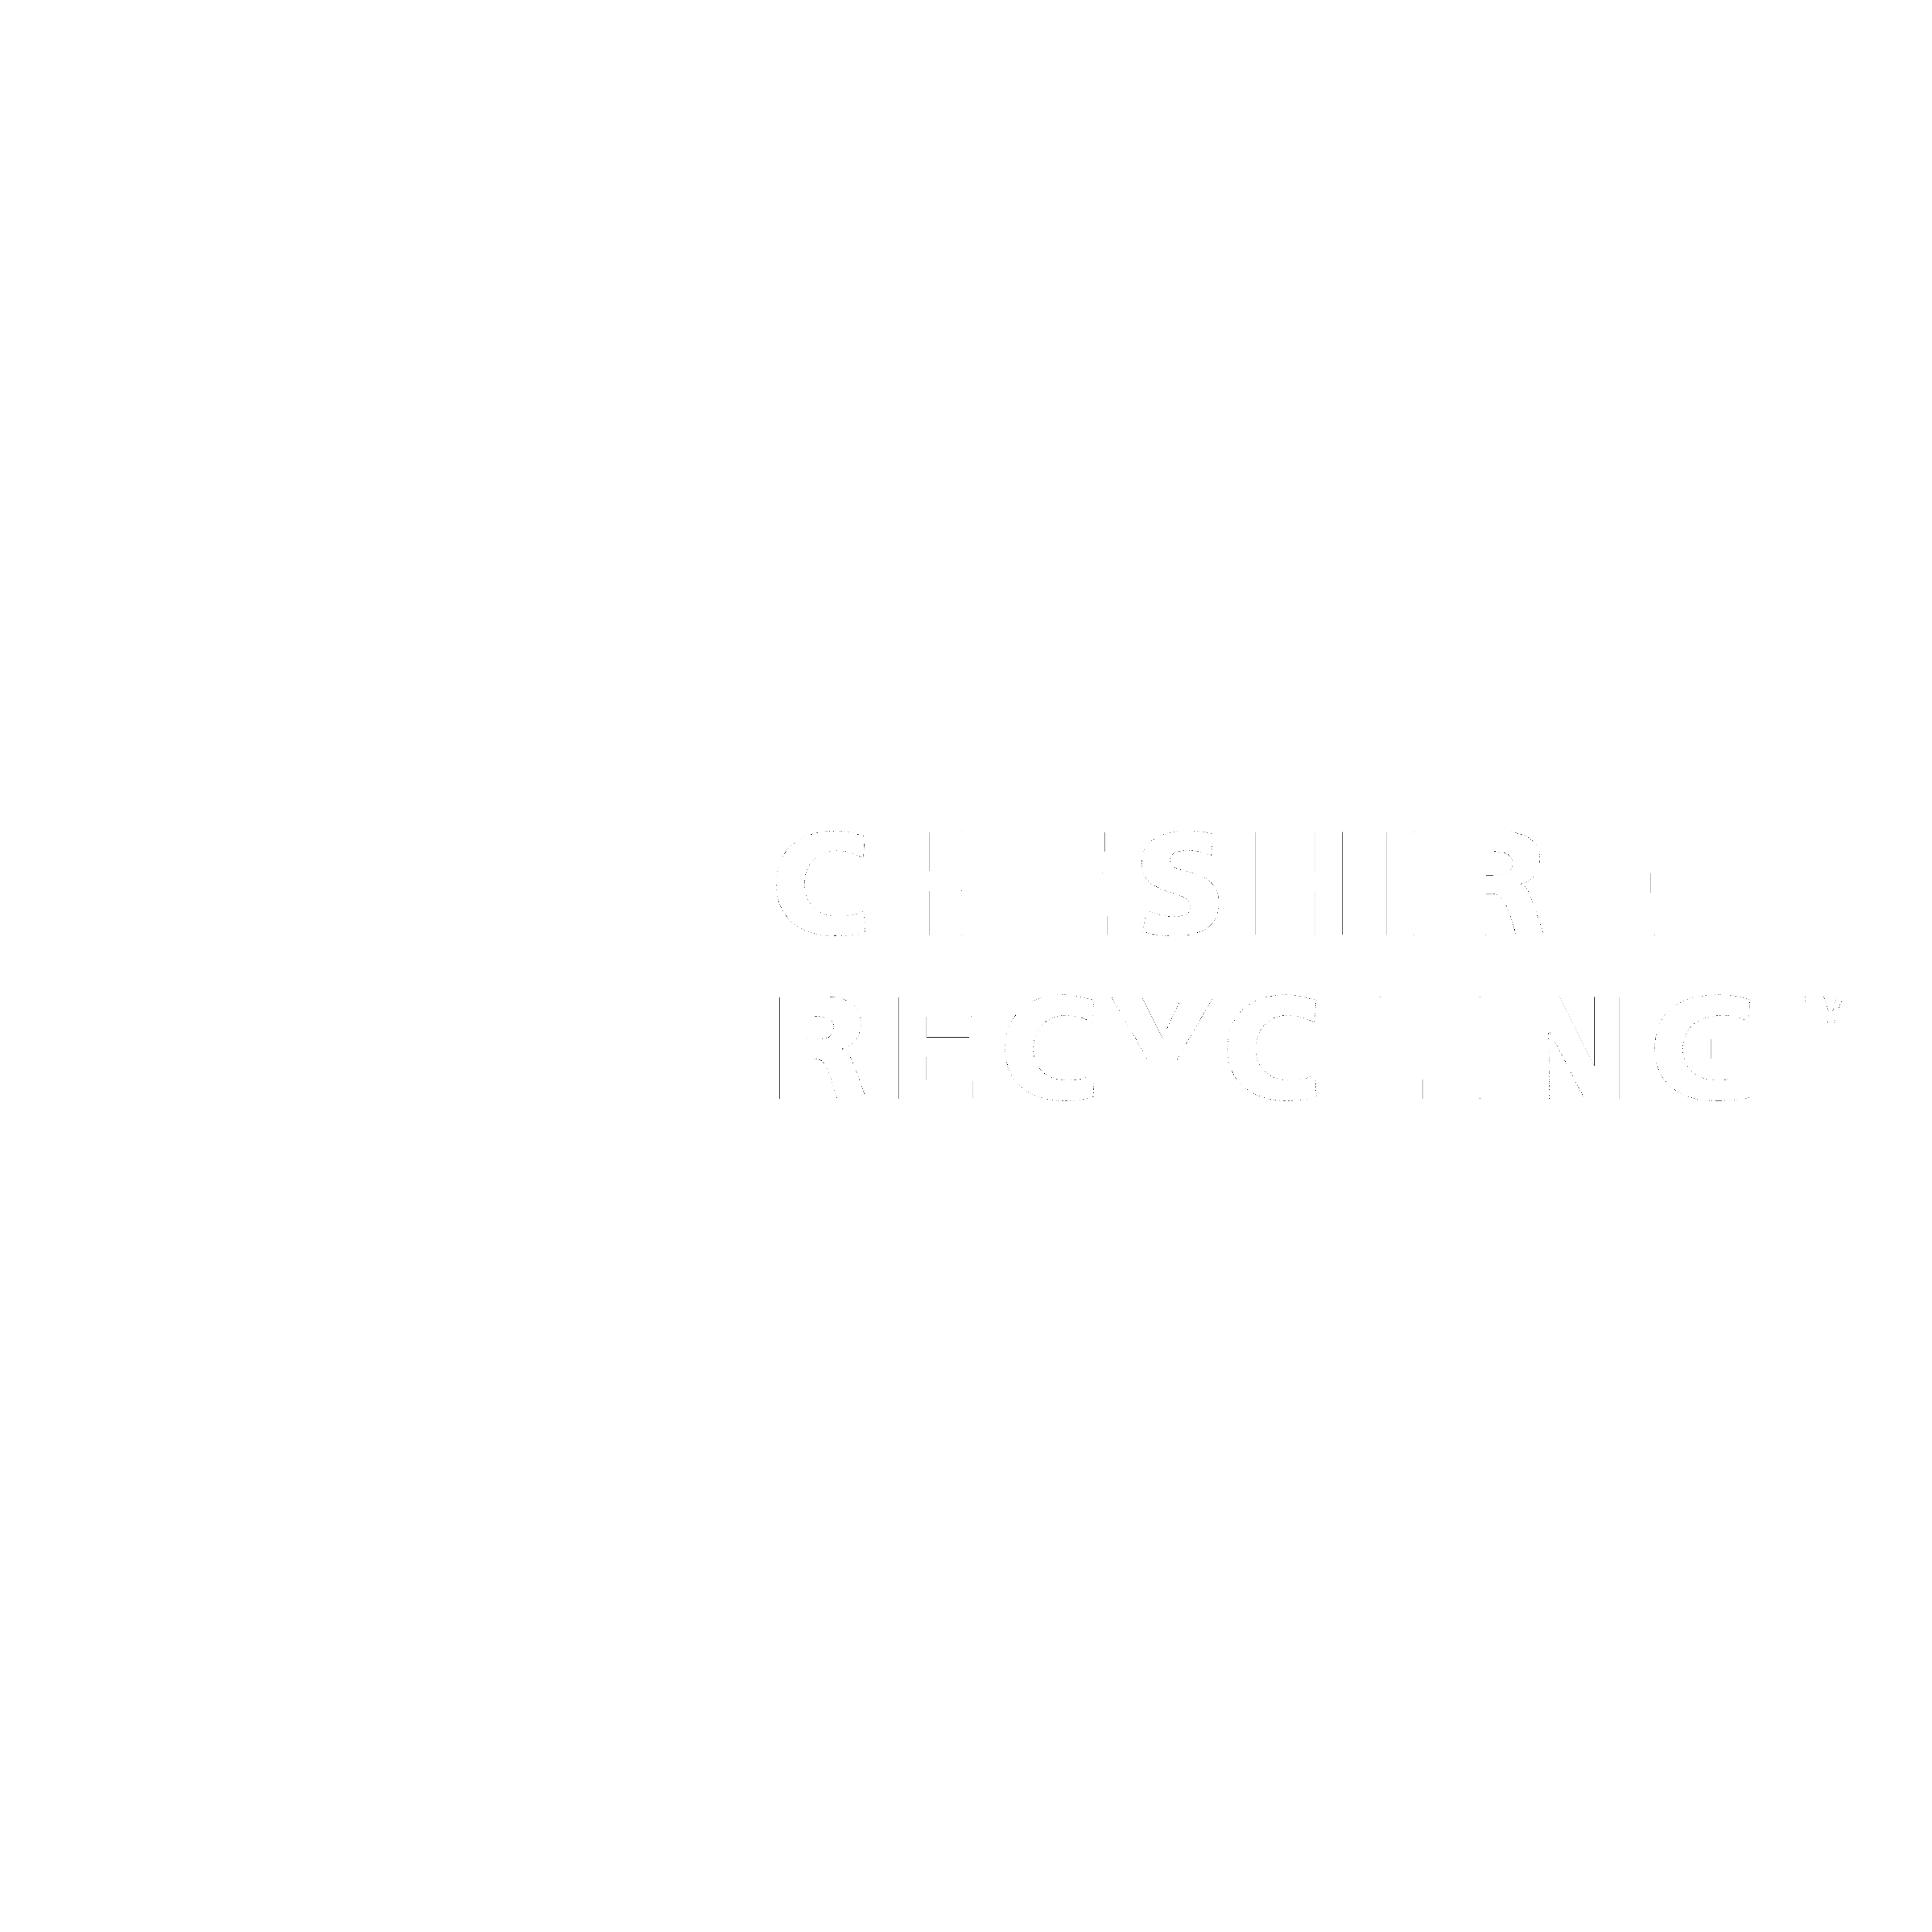 Black and White Recycle Logo - Cheshire Recycling Logo PNG Transparent & SVG Vector - Freebie Supply